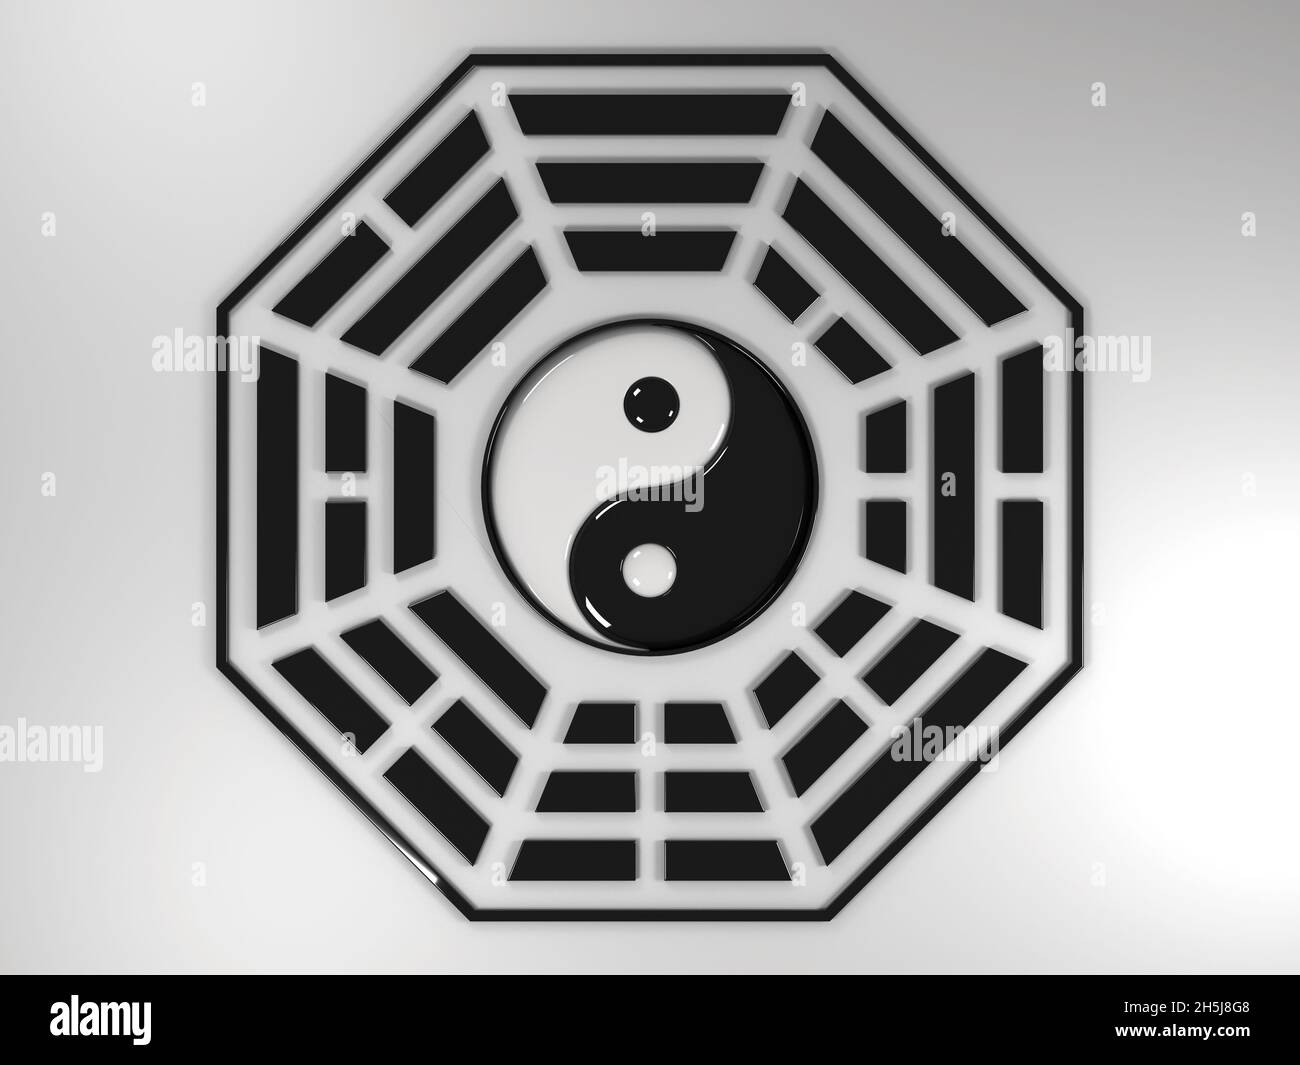 3d rendering of the ancient bagua symbol (yin and yang, I-Ching) with a liquid glossy look Stock Photo